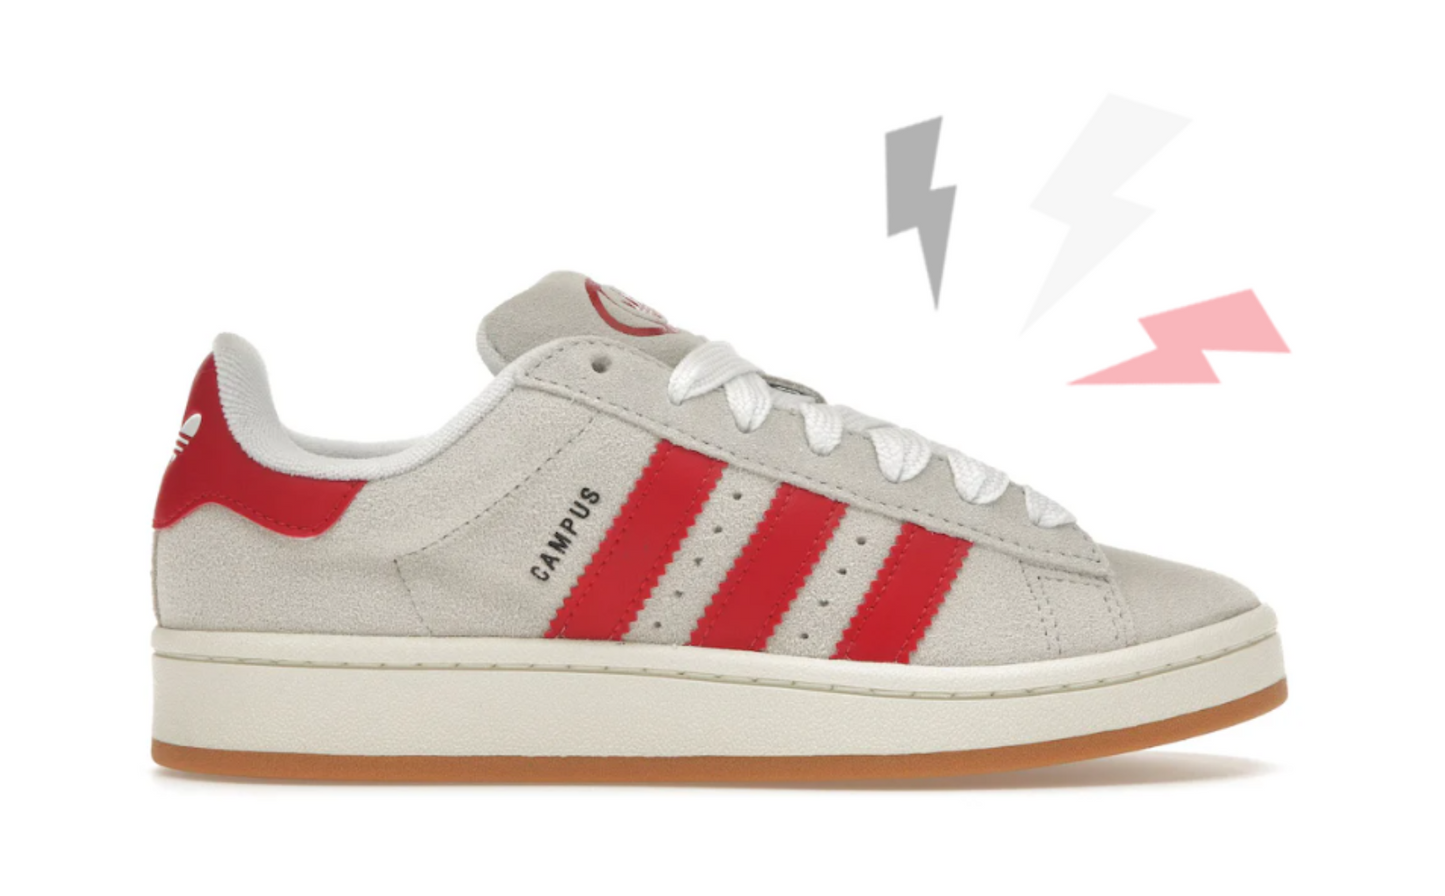 Adidas Campus Crystal White Better Scarlet